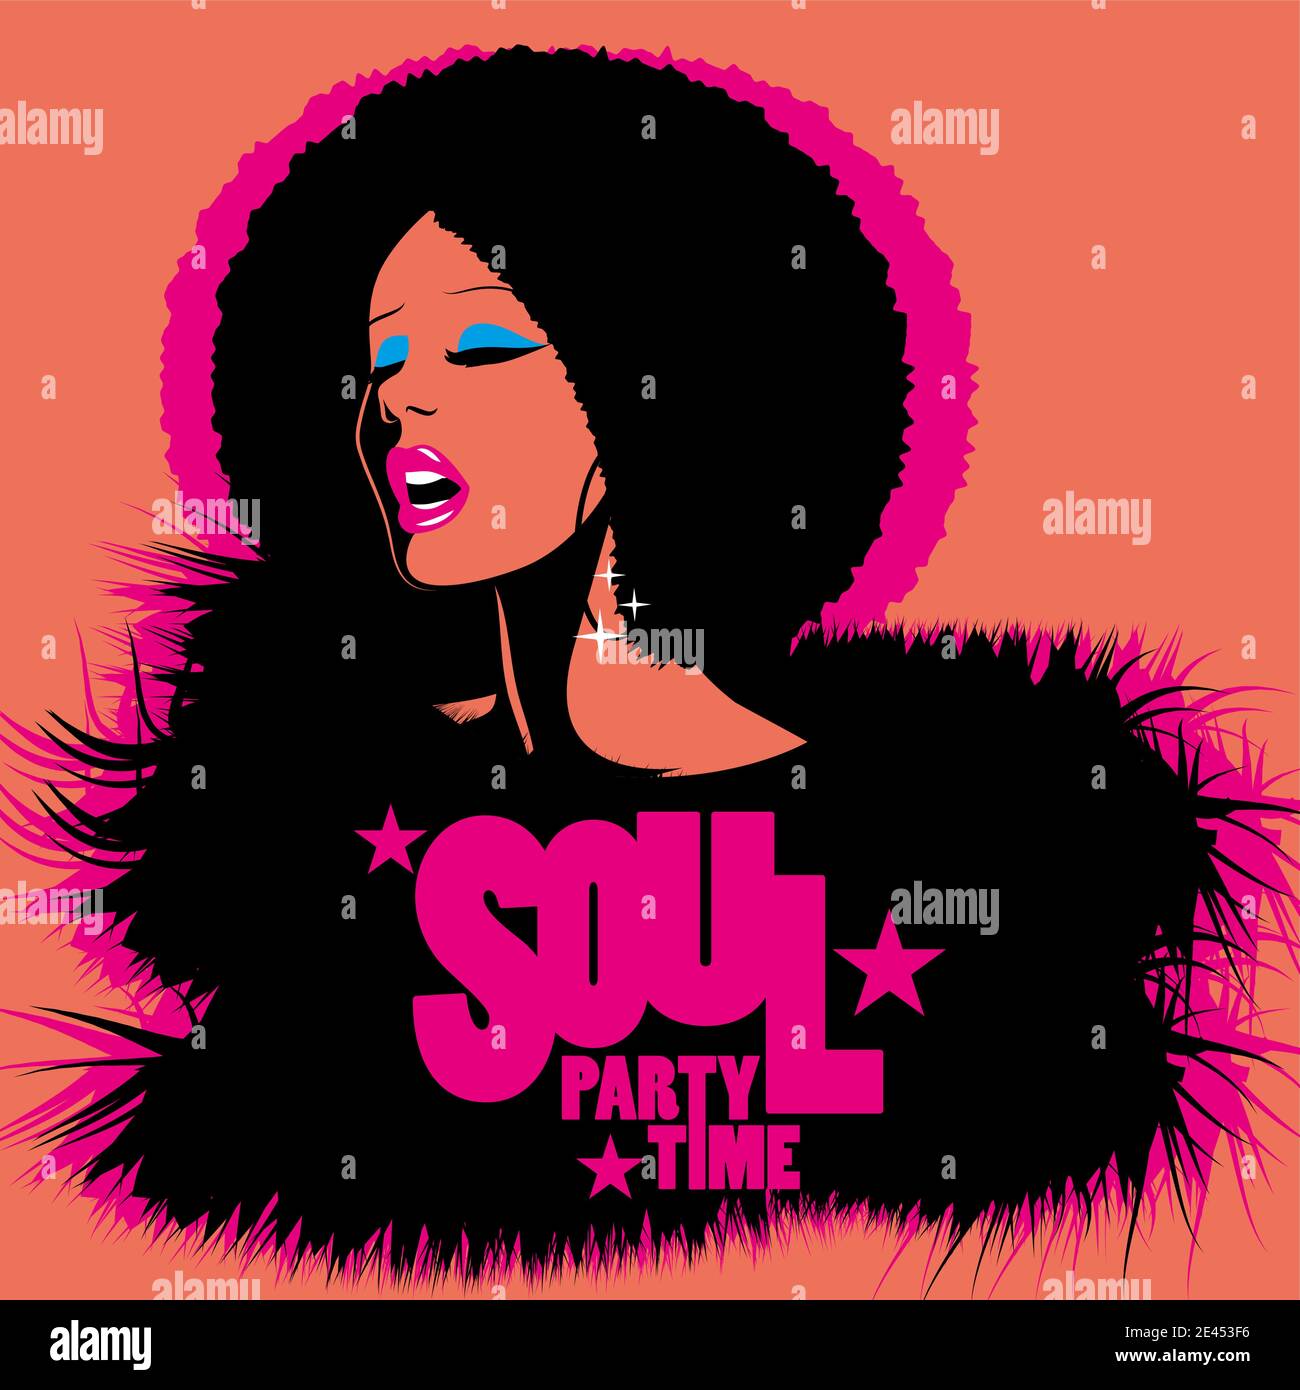 https://c8.alamy.com/comp/2E453F6/soul-party-time-soul-funk-jazz-or-disco-music-poster-beautiful-african-american-woman-singing-2E453F6.jpg